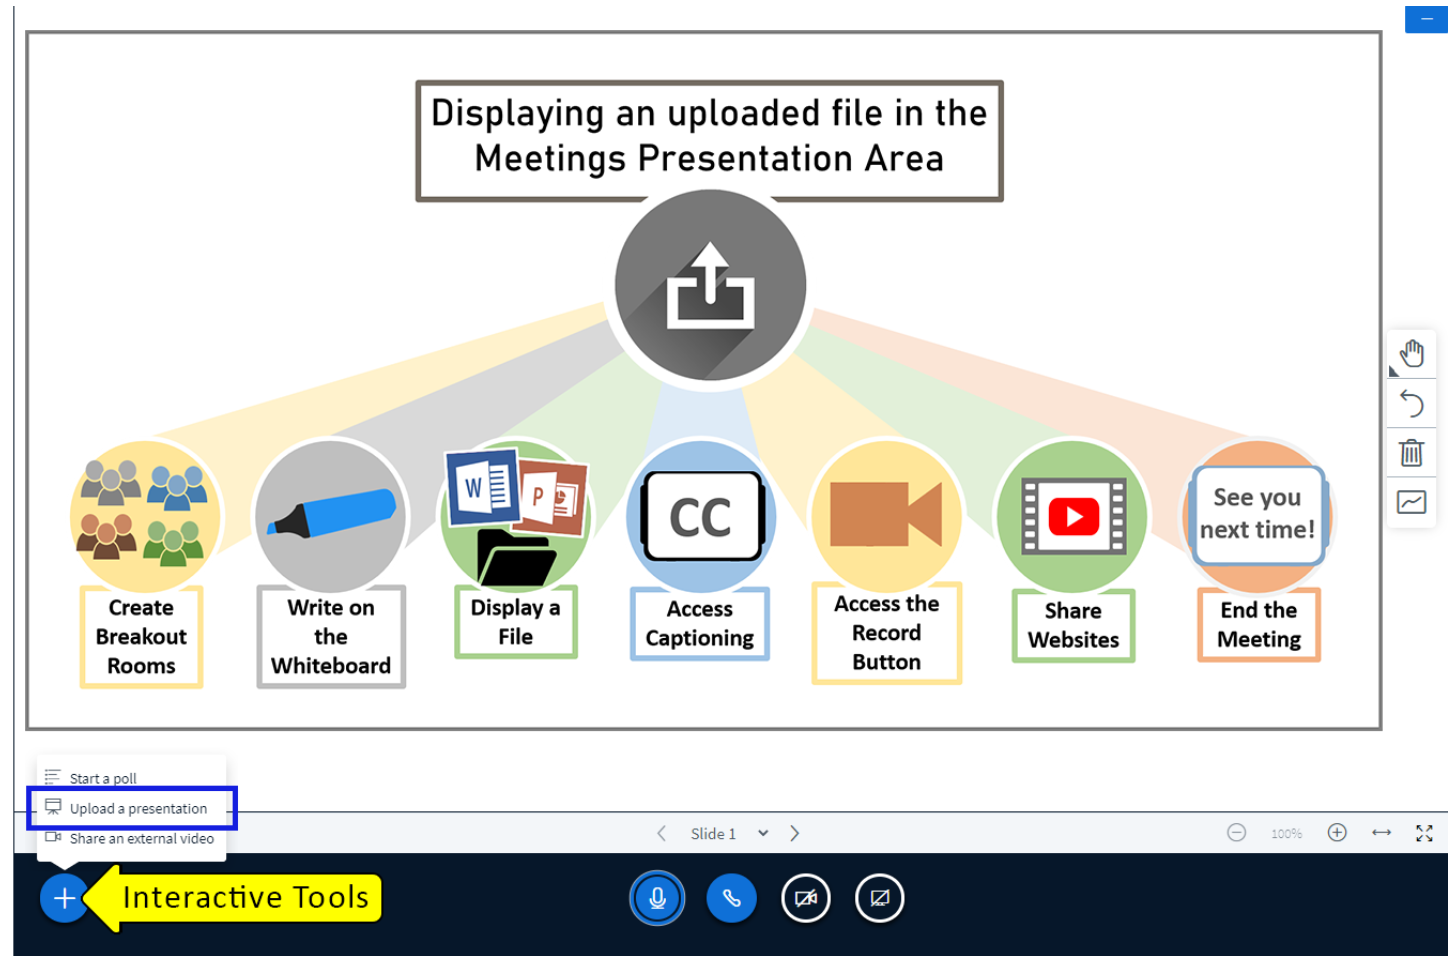 Features available when uploading a file to display include: create breakout rooms, write on the whiteboard, display a file, access captioning, access the record button, sharing websites, ending the meeting.